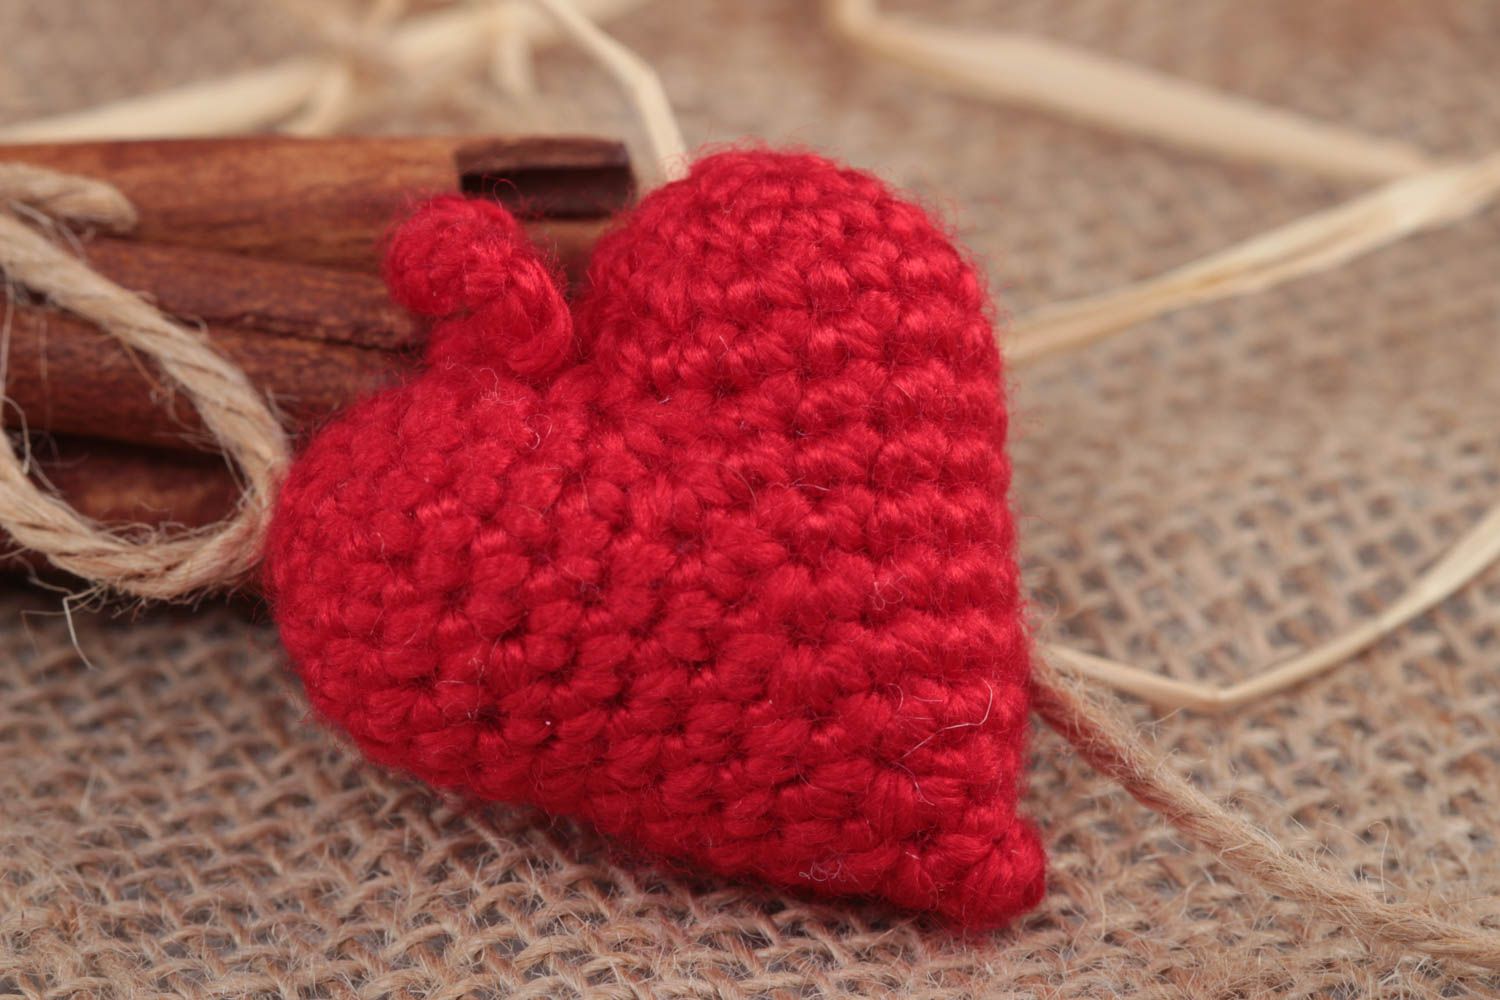 Handmade small crochet soft toy red heart with eyelet for kids and interior decor photo 1